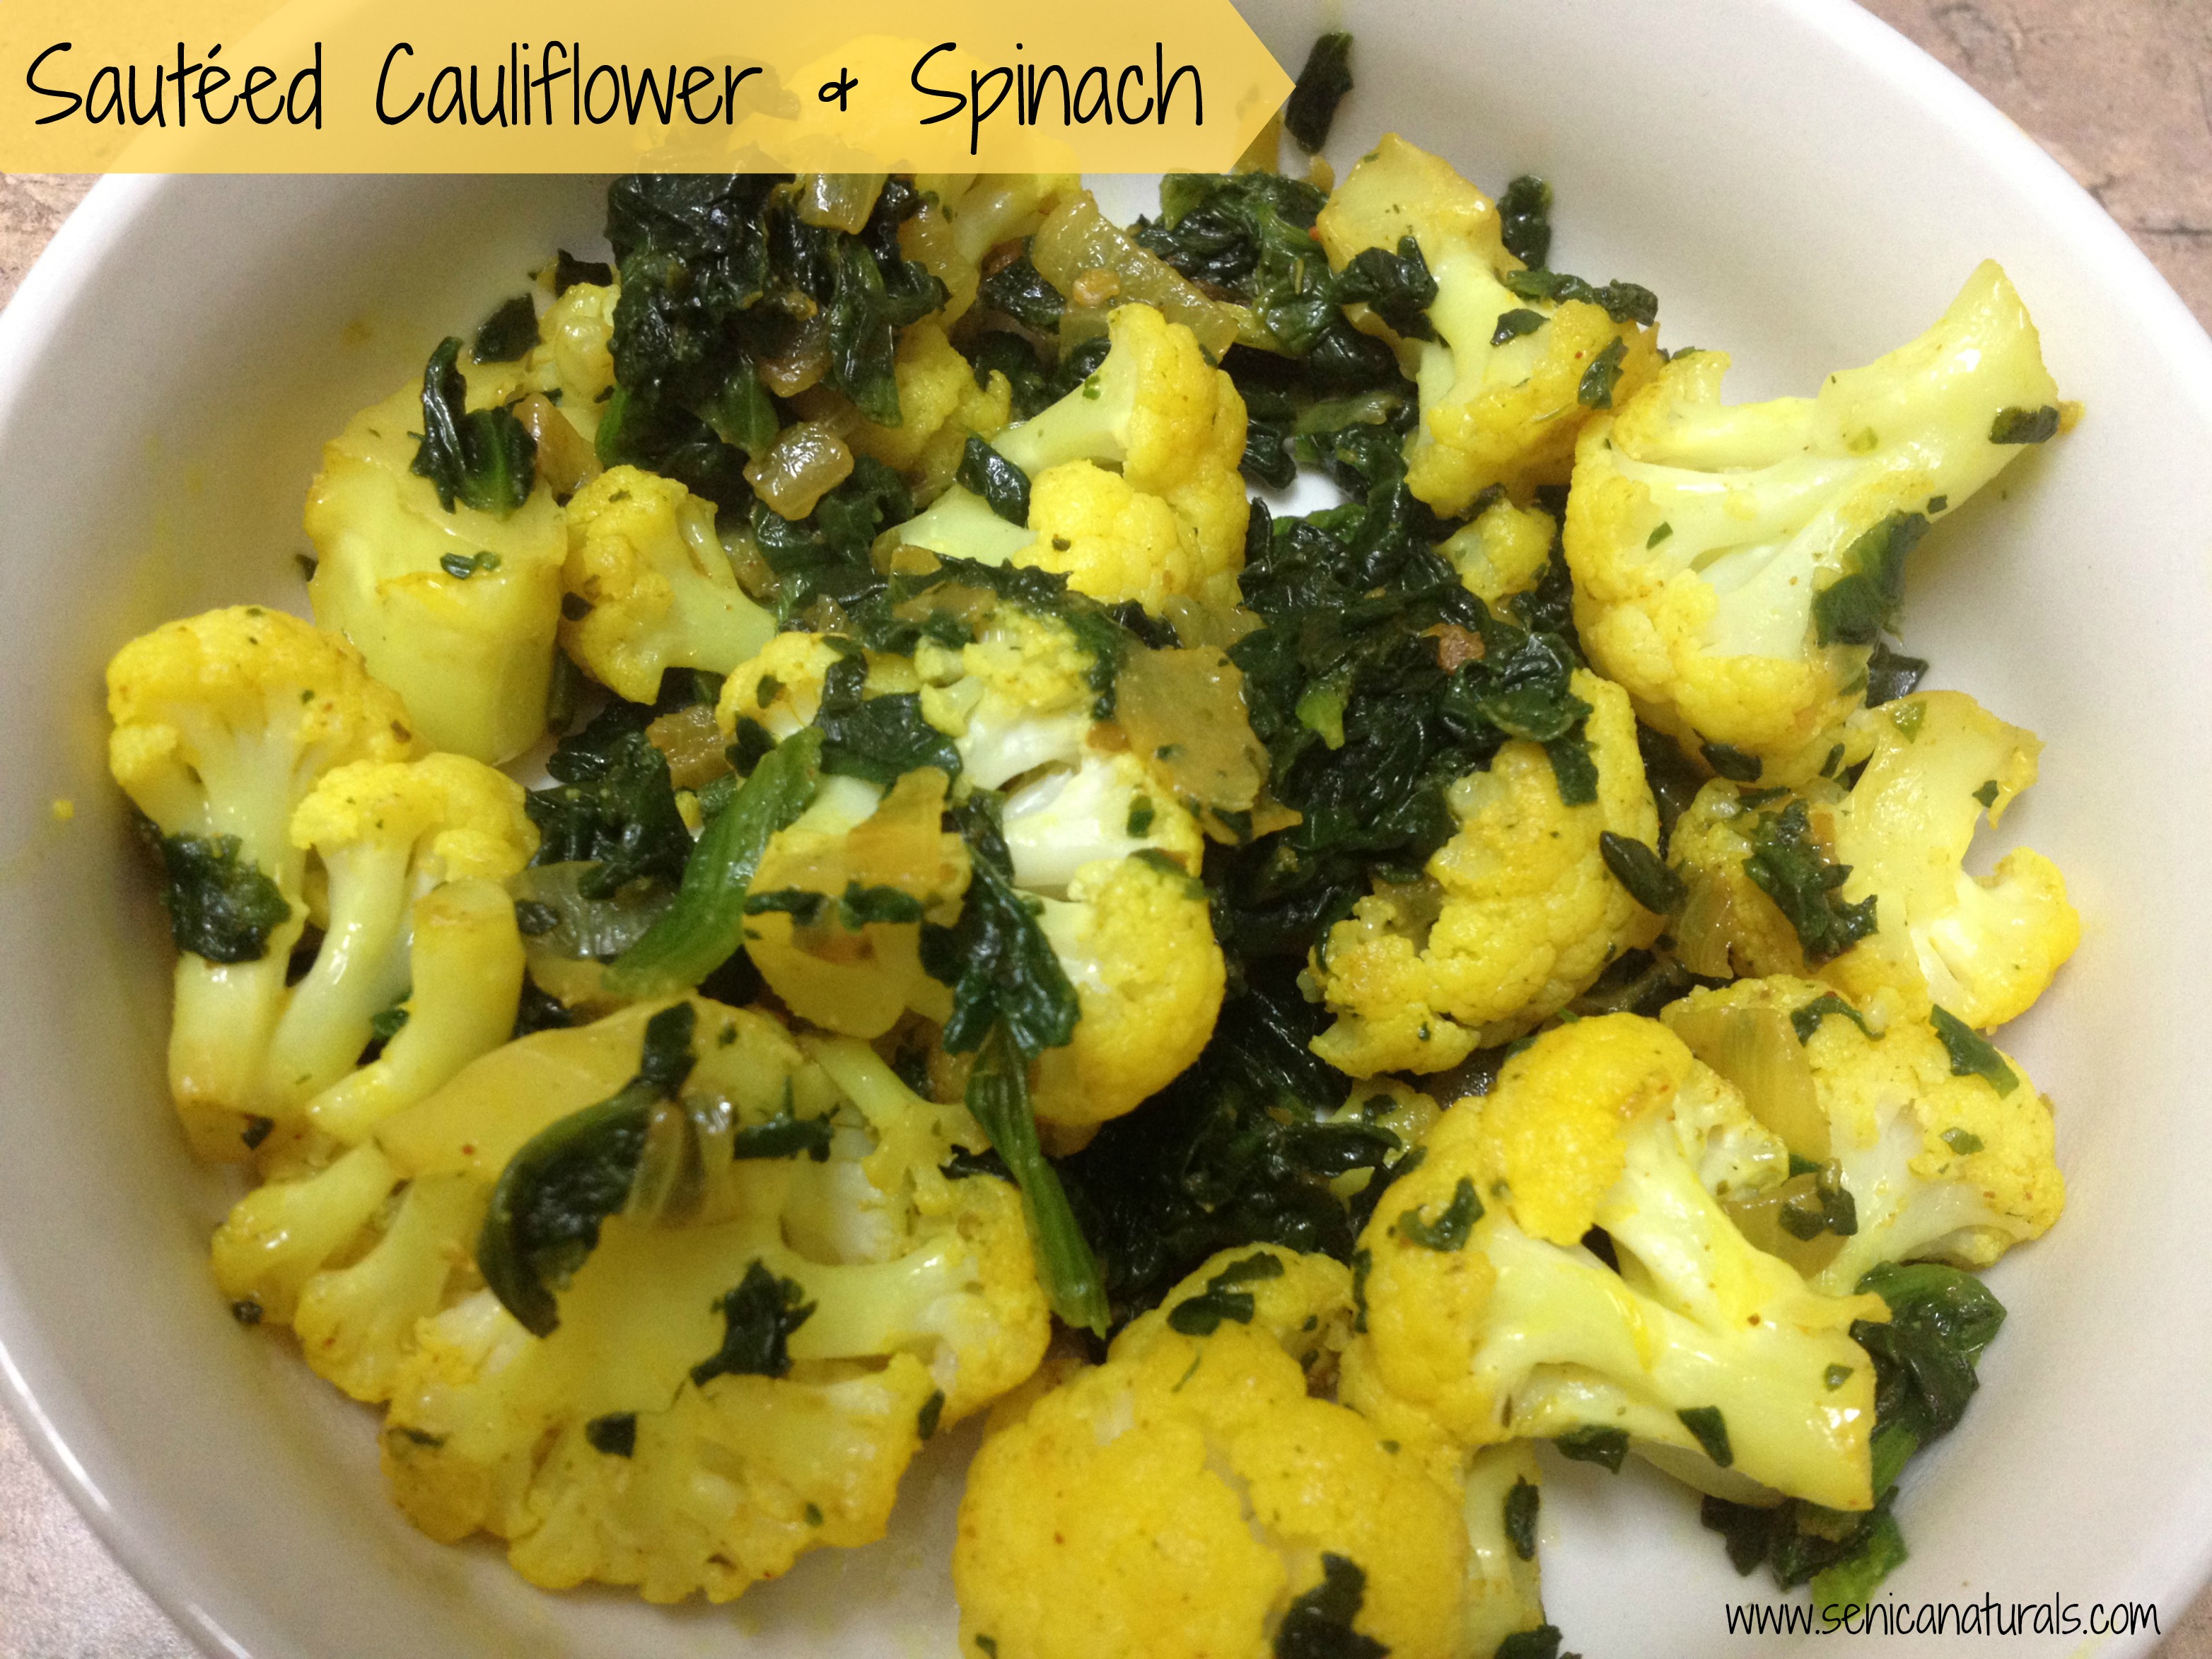 Sauteed Cauliflower & Spinach IMG_0984 with Text